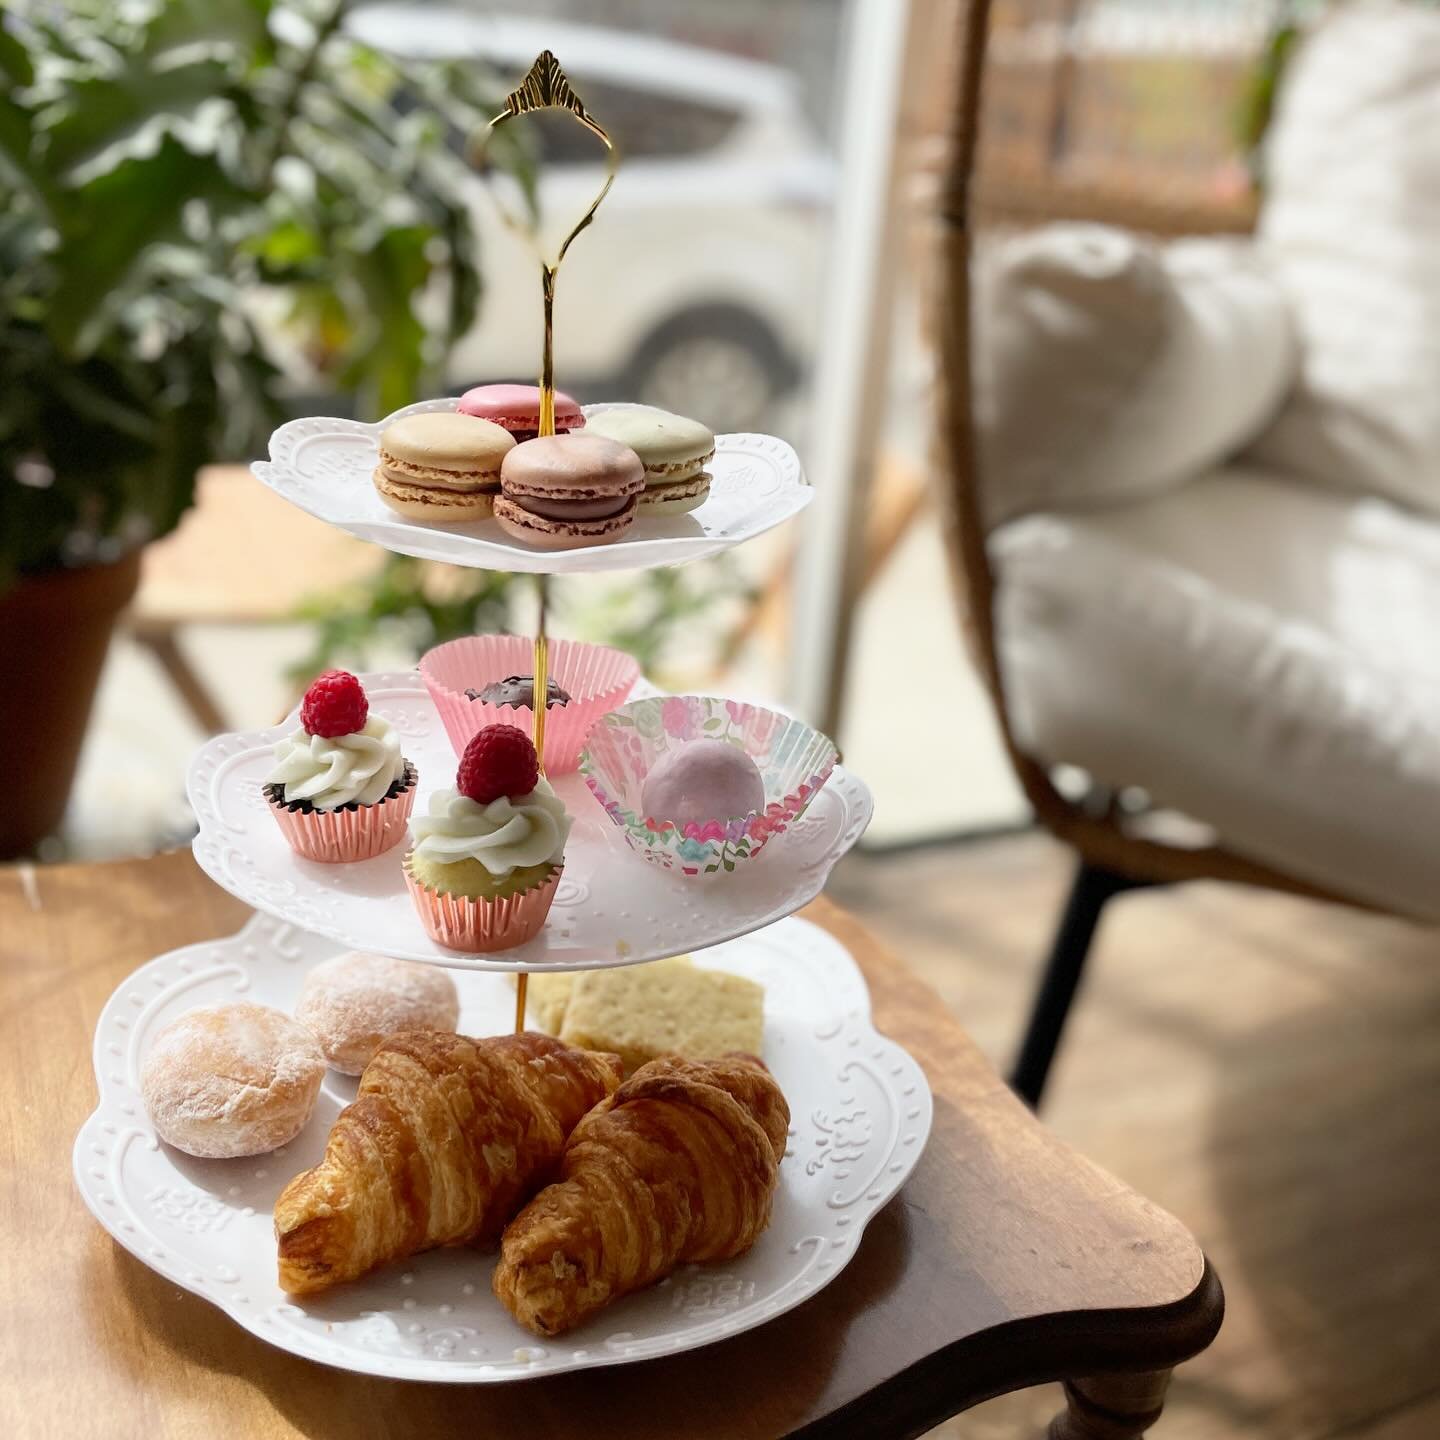 Let Purrista Cat Cafe treat you and your Mom or loved one to our 3rd Annual Kit-TEA Party in the Cat Lounge!

The cost of $75.00 includes 2 ppl enjoying 90 minutes together in the cat lounge with a three-tiered tray full of mini croissants, truffles,